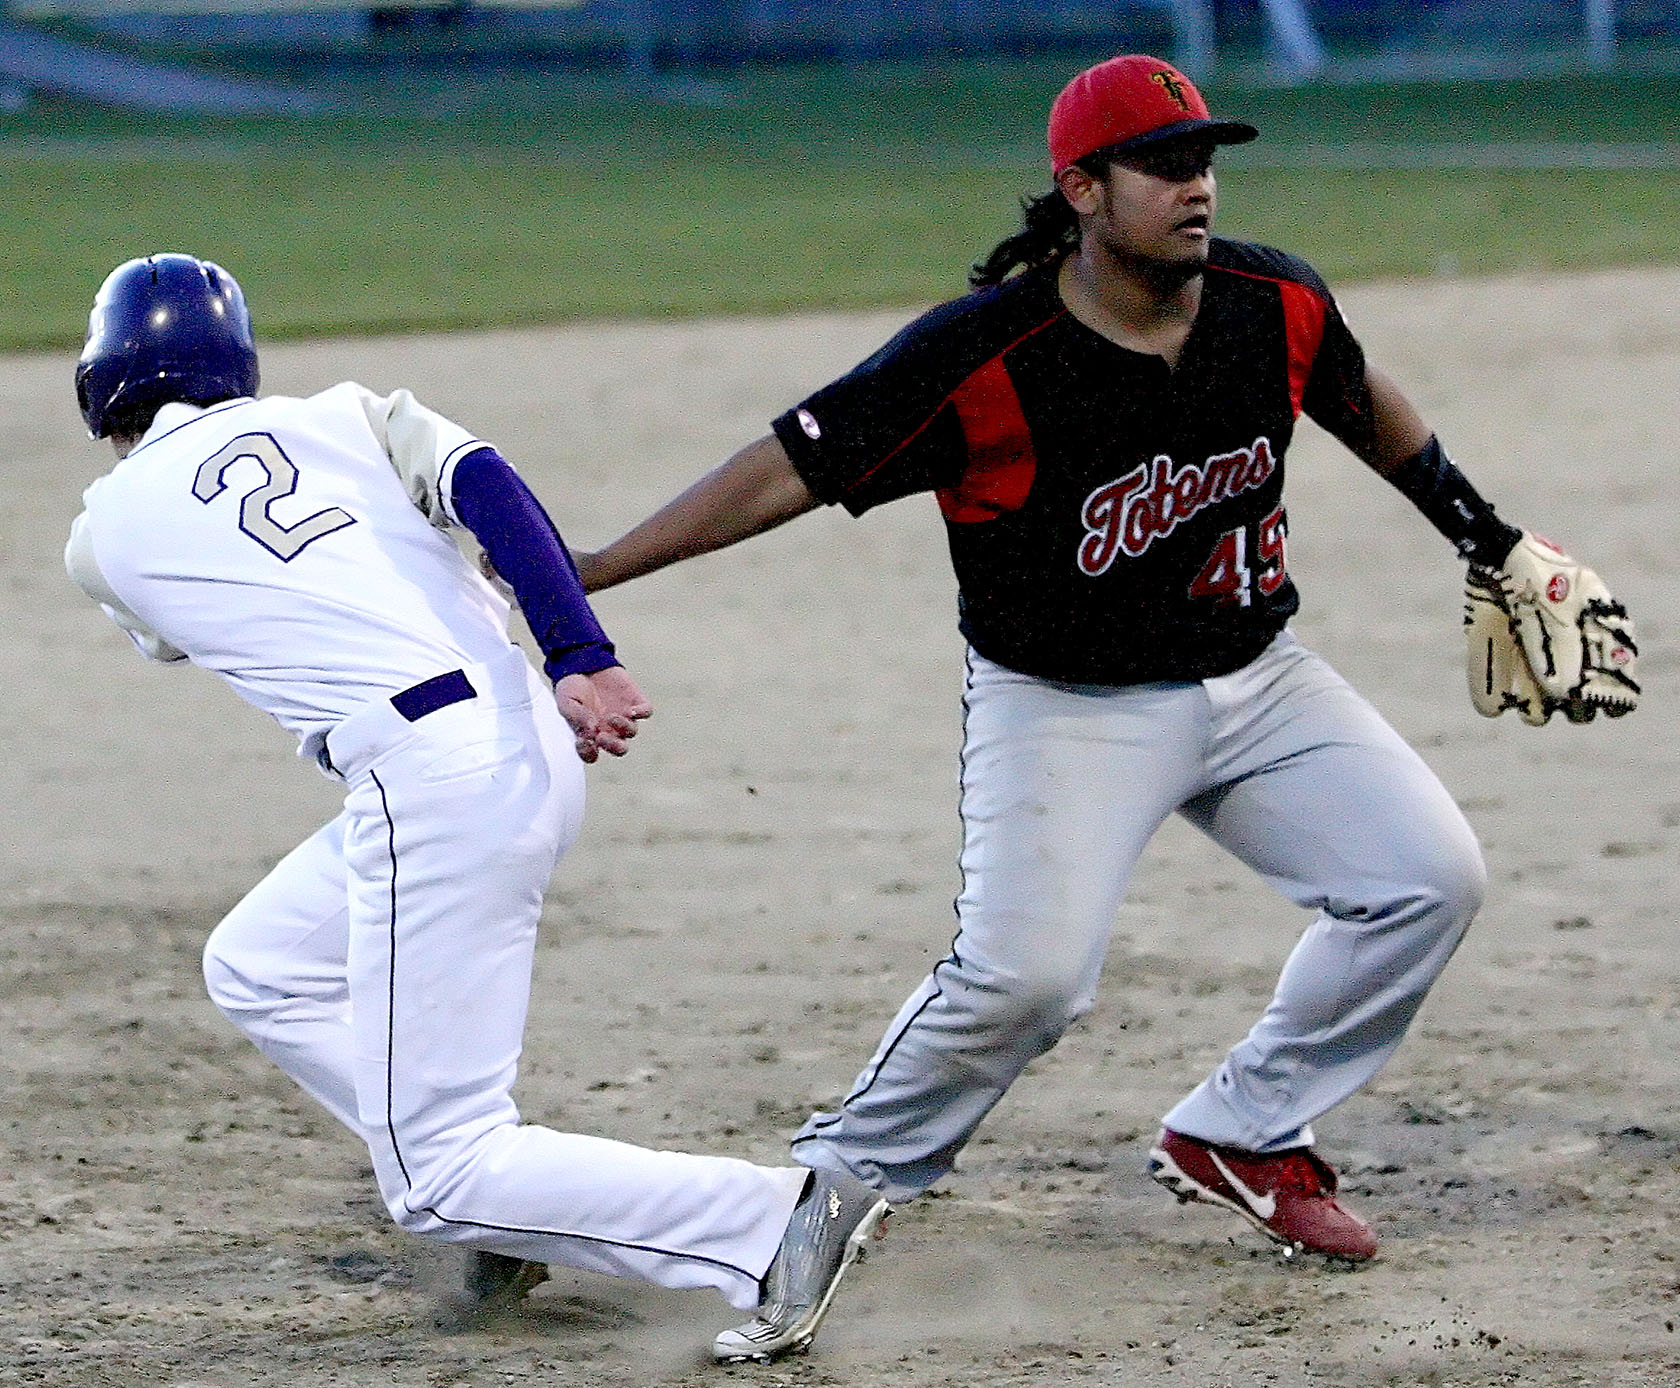  Iuver Abraham of Tyee tags out Highline's Nick Joyal in a rundown between 2nd and 3rd.